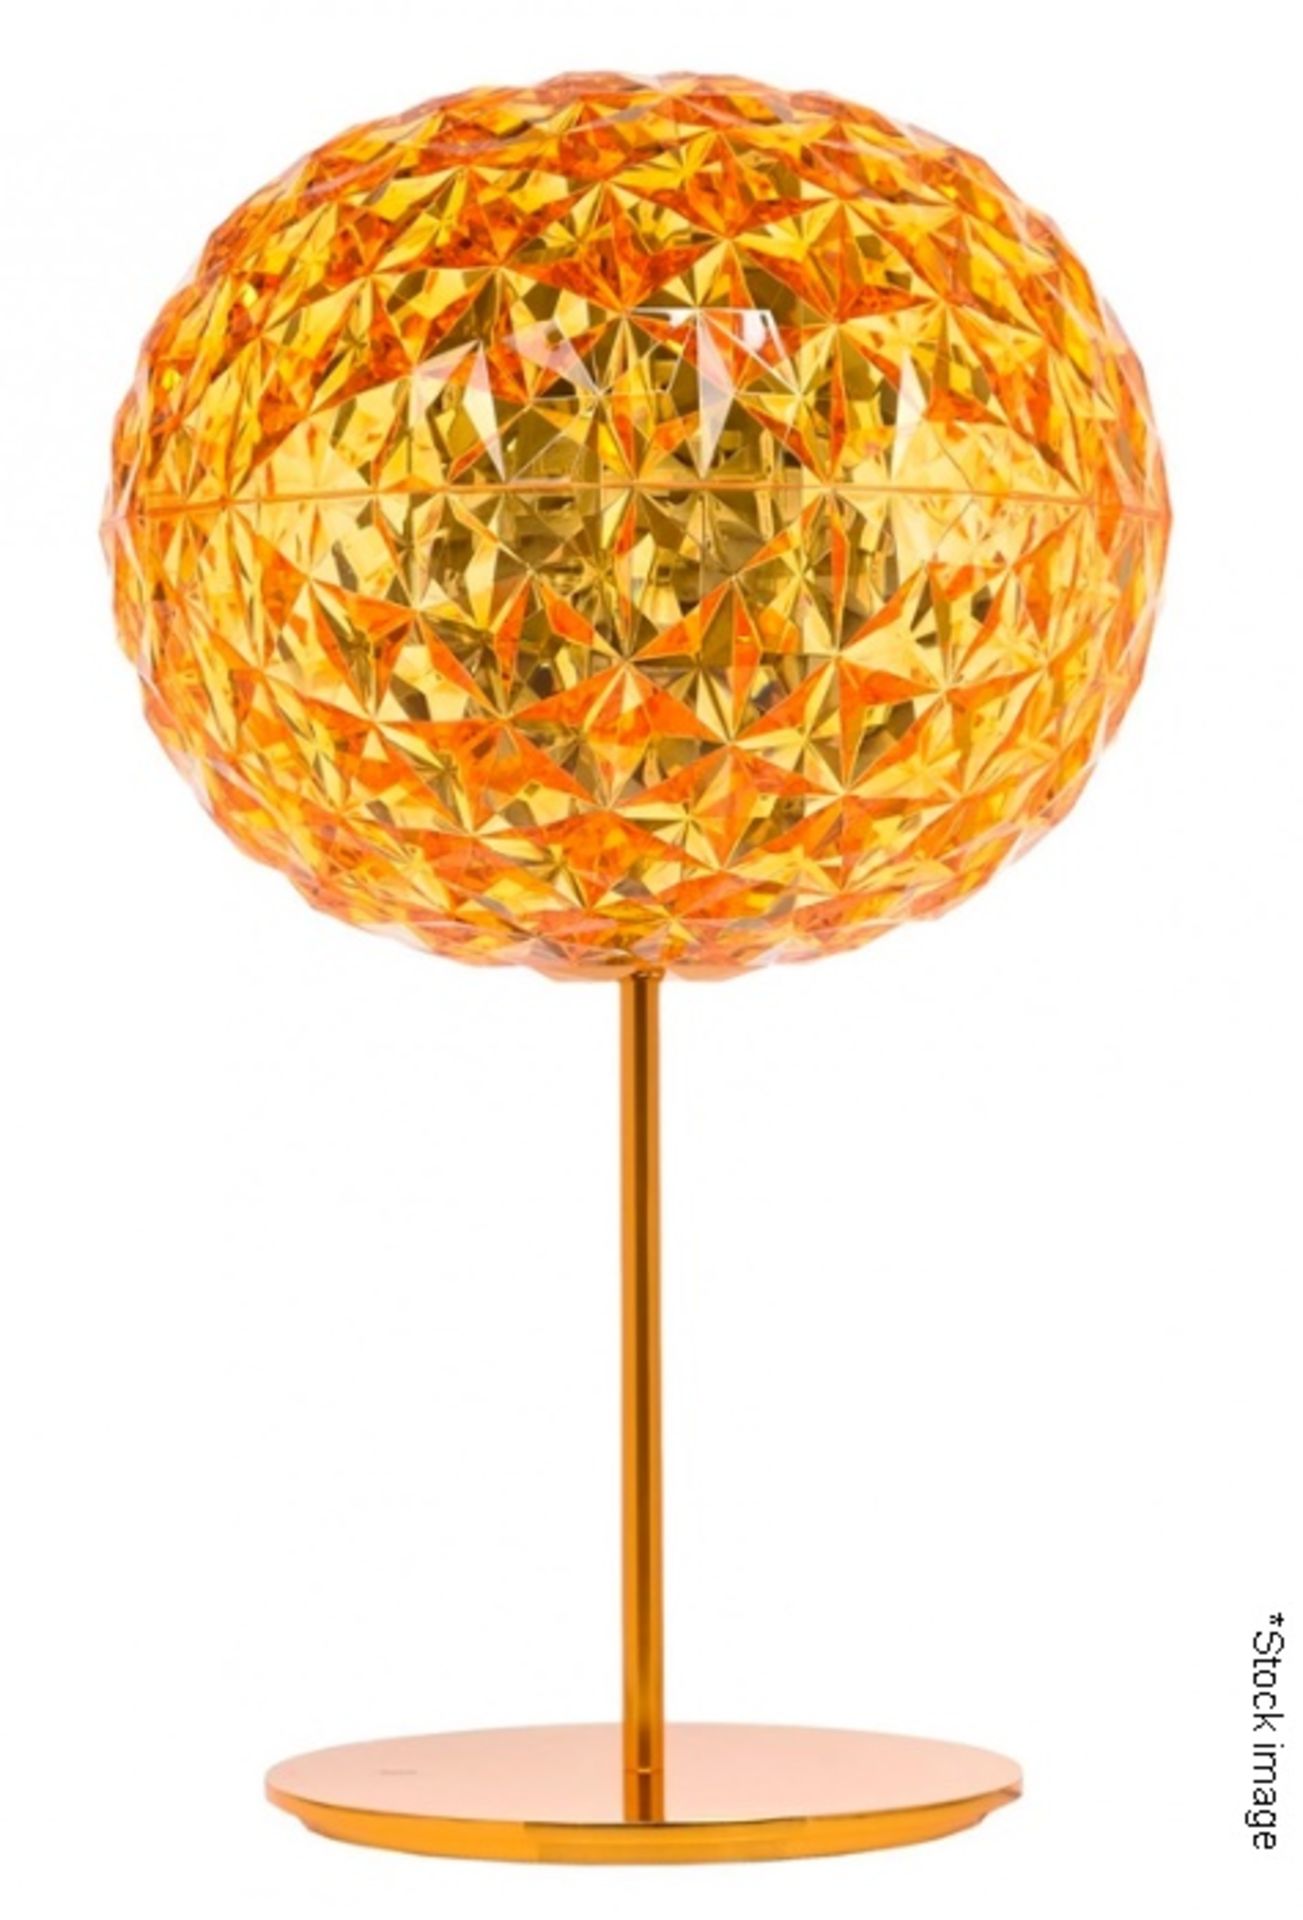 1 x KARTELL 'Planet' Designer Table Lamp In Yellow - Sealed Boxed Stock - Original RRP £524.00